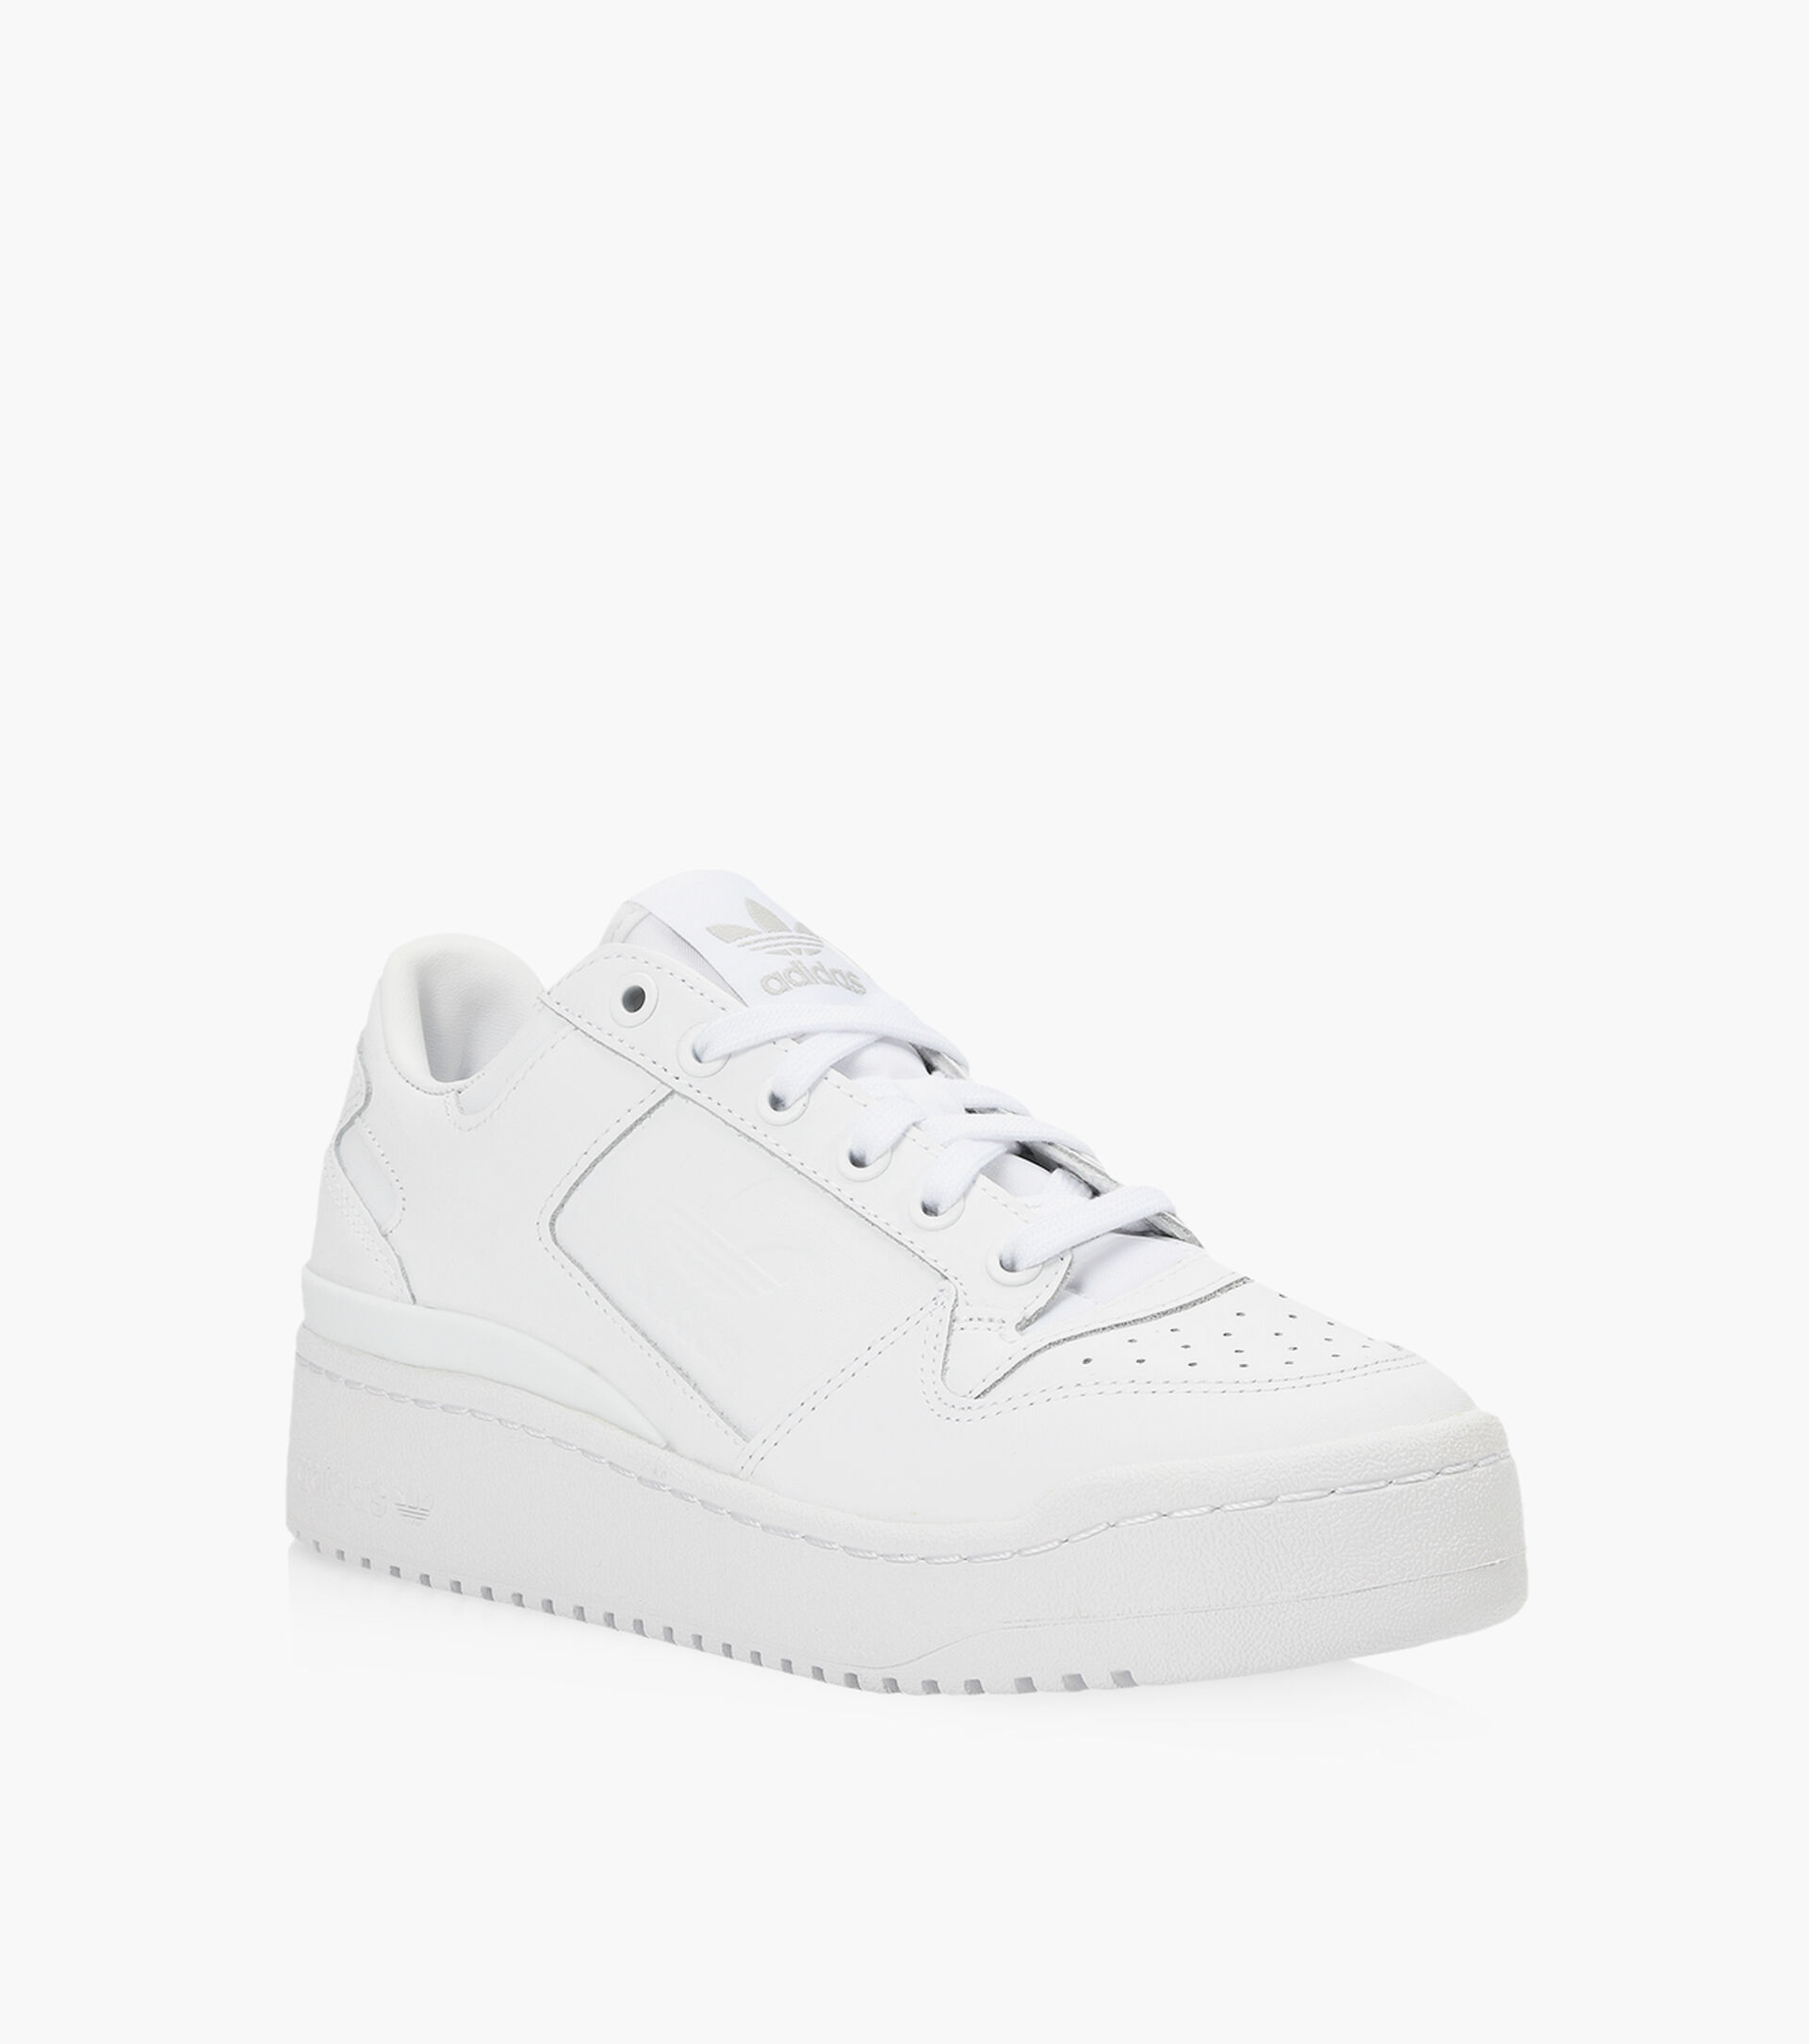 ADIDAS FORUM BOLD SHOES - White Leather | Browns Shoes